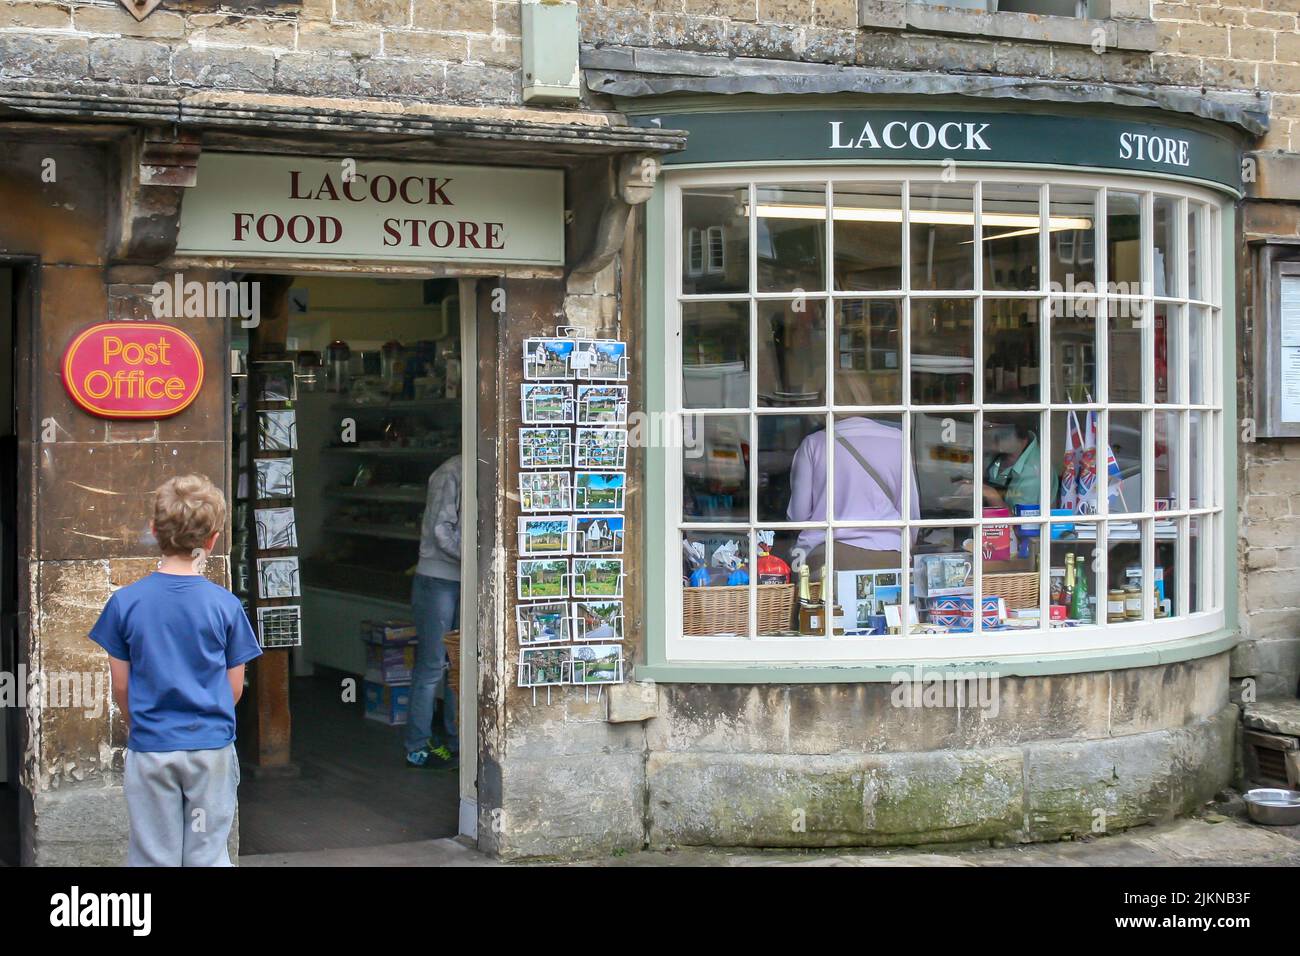 An old food store in Lacock Village, Wiltshire county, England Stock Photo